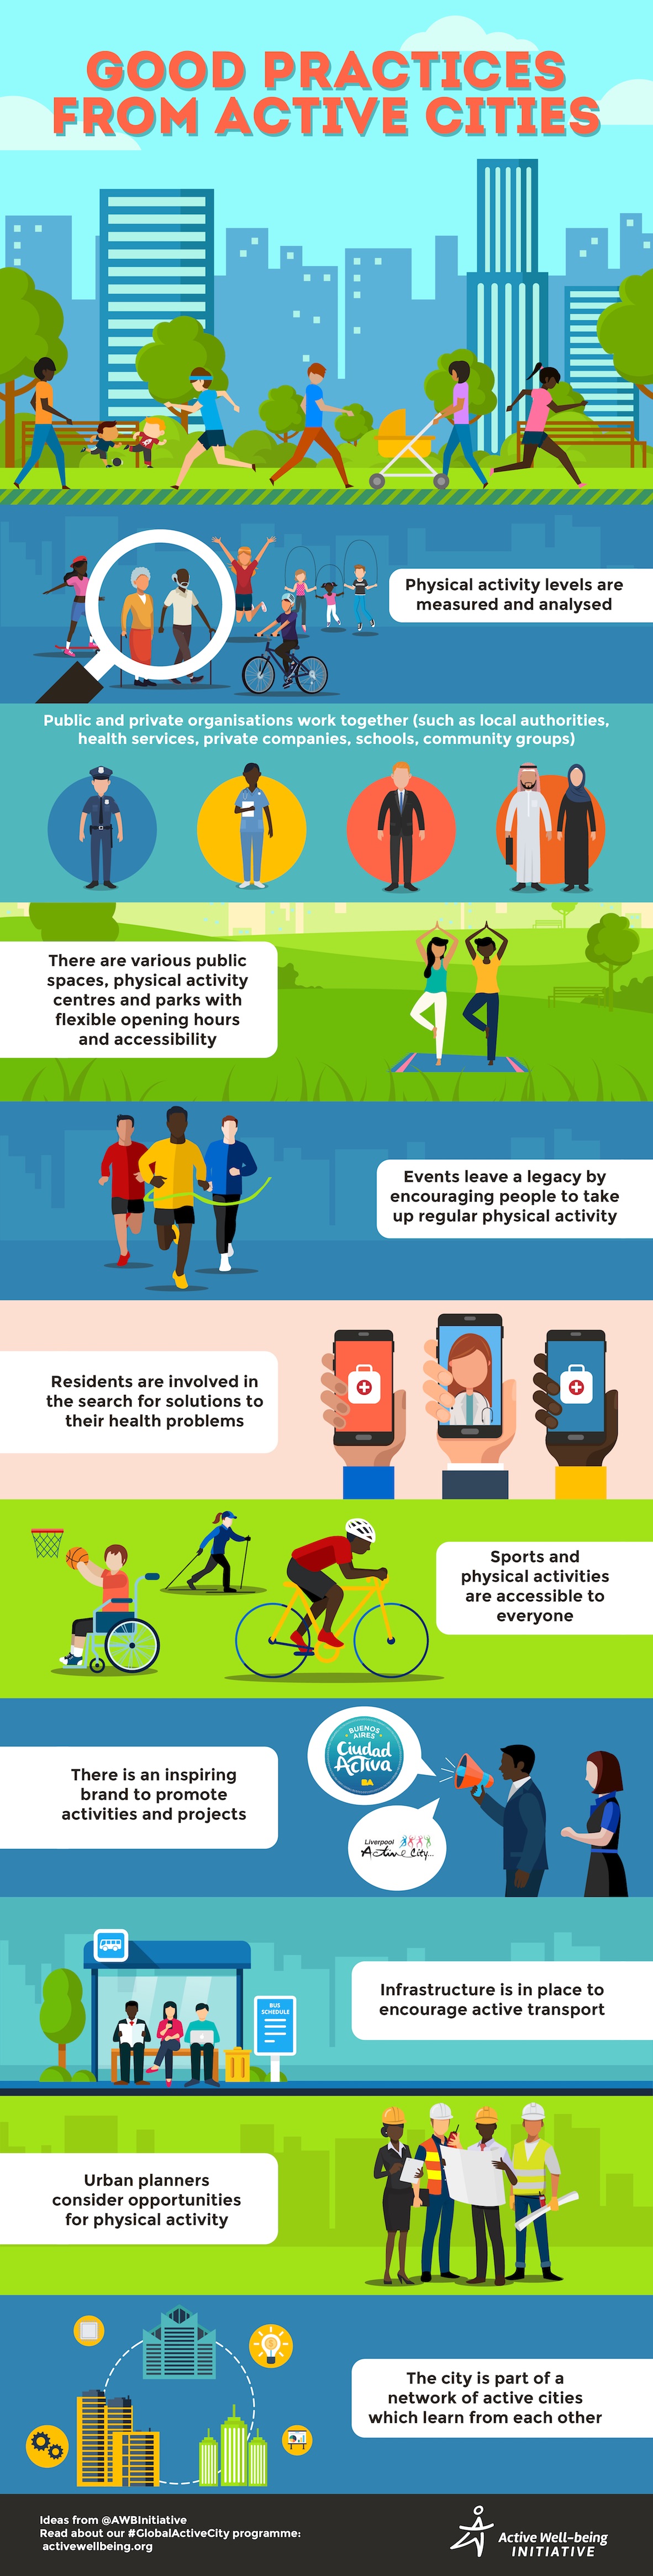 An infographic showing good practices from active cities: Physical activity levels are measured and analysed. Public and private organisations work together (such as local authorities, health services, private companies, schools, community groups). There are various public spaces, physical activity centres and parks with flexible opening hours and accessibility. Events leave a legacy by encouraging people to take up regular physical activity. Residents are involved in the search for solutions to their health problems. Sports and physical activities are accessible to everyone. There is an inspiring brand to promote activities and projects. Infrastructure is in place to encourage active transport. Urban planners consider opportunities for physical activity. The city is part of a network of active cities which learn from each other.